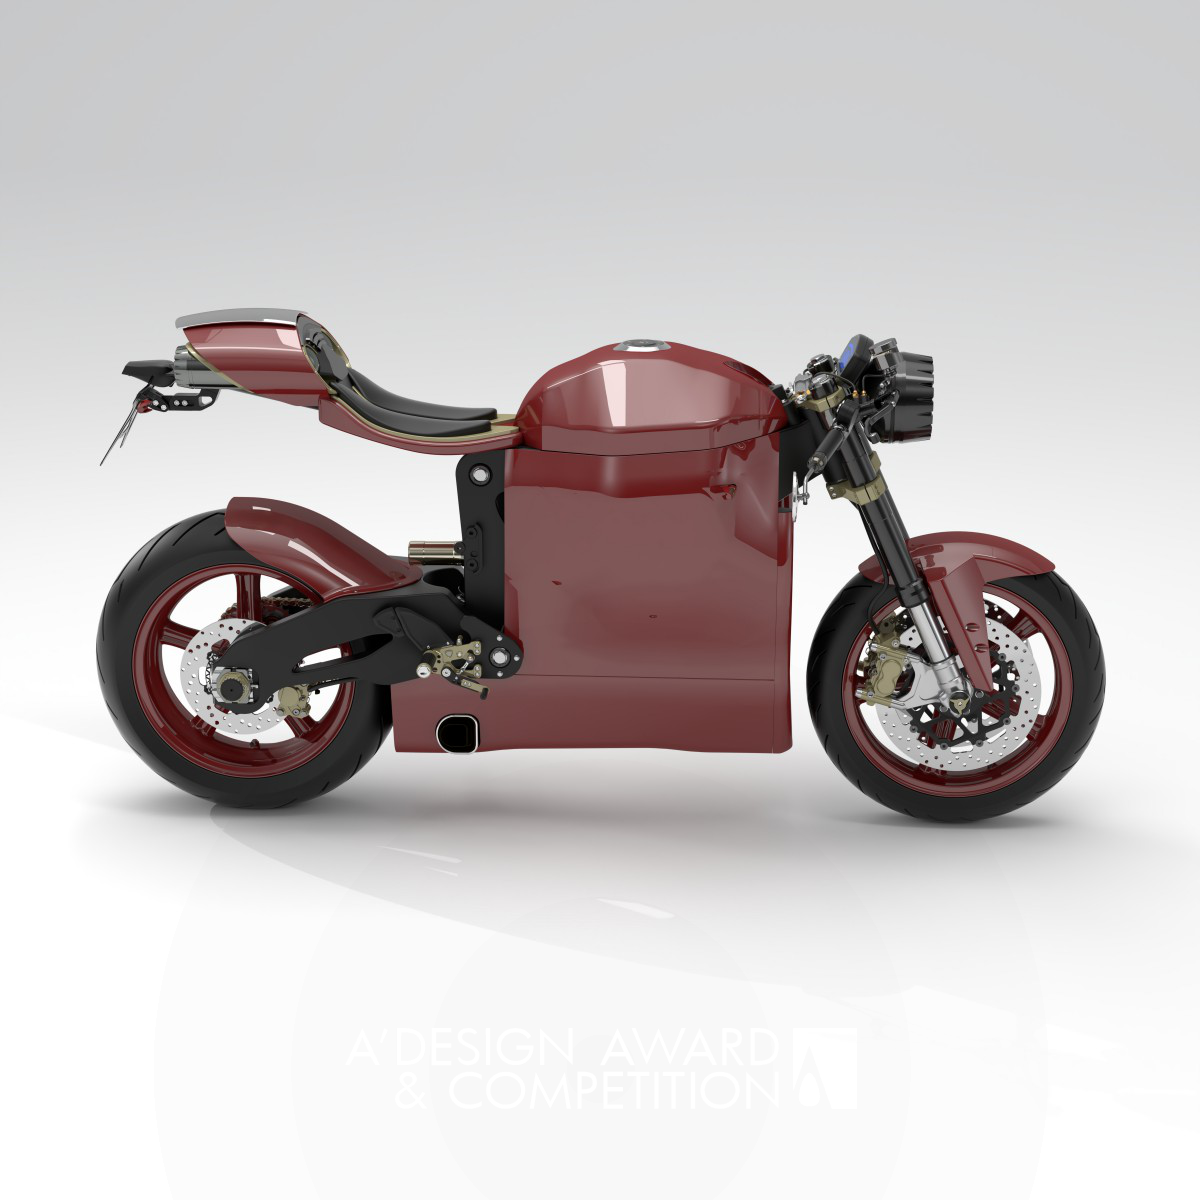 Revolutionary Motorcycle Design Unveiled by Marco Naccarella